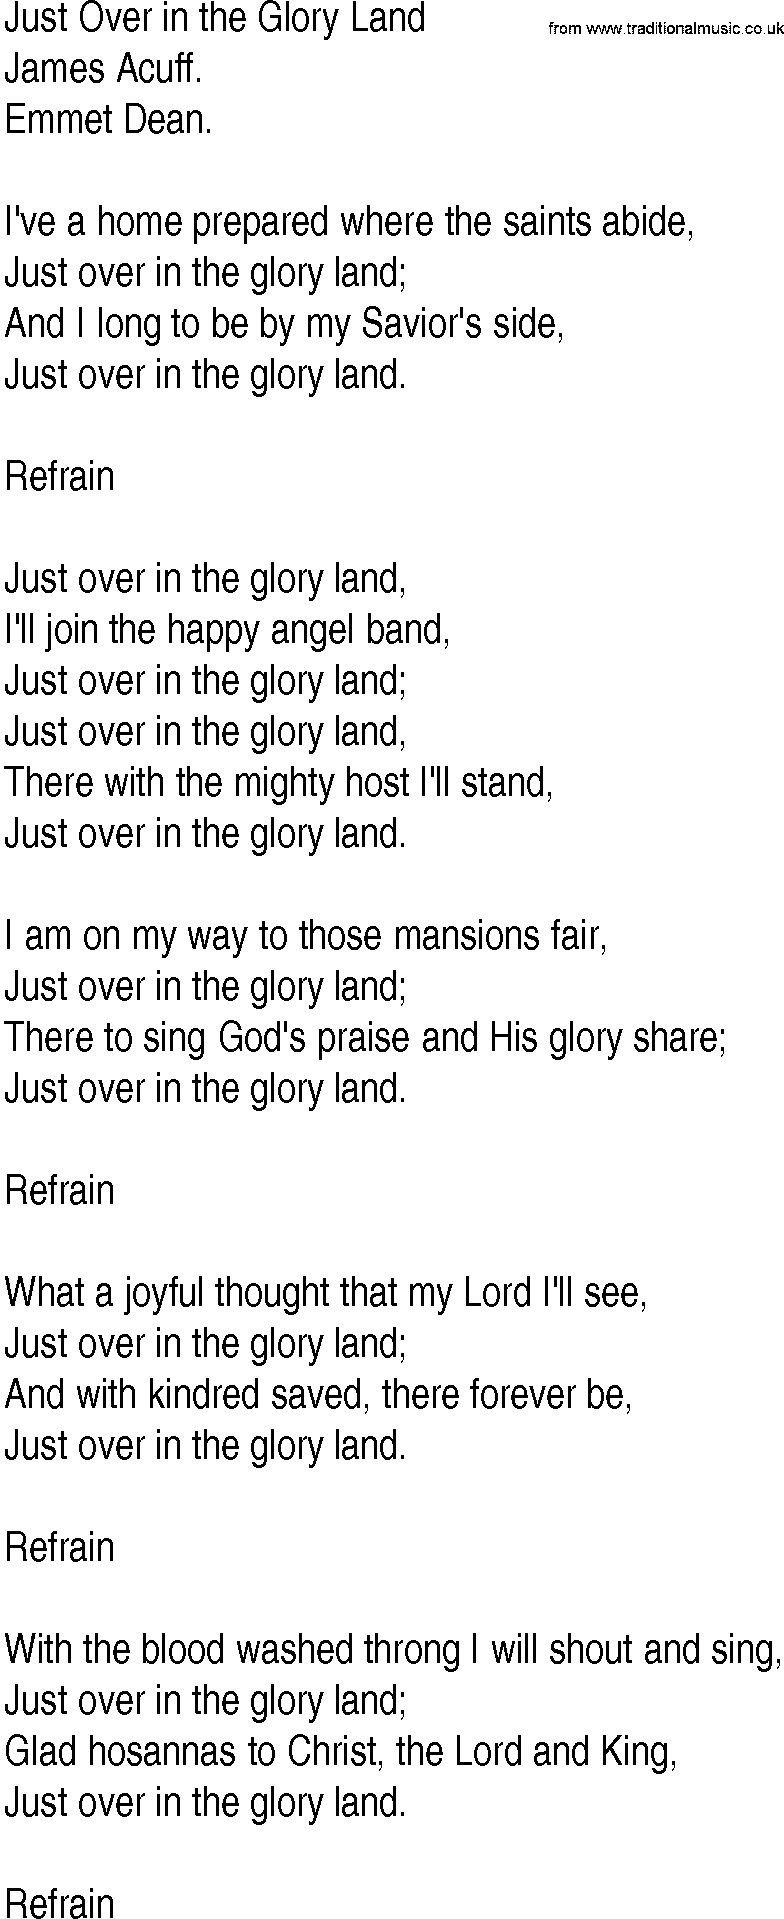 Hymn and Gospel Song: Just Over in the Glory Land by James Acuff lyrics